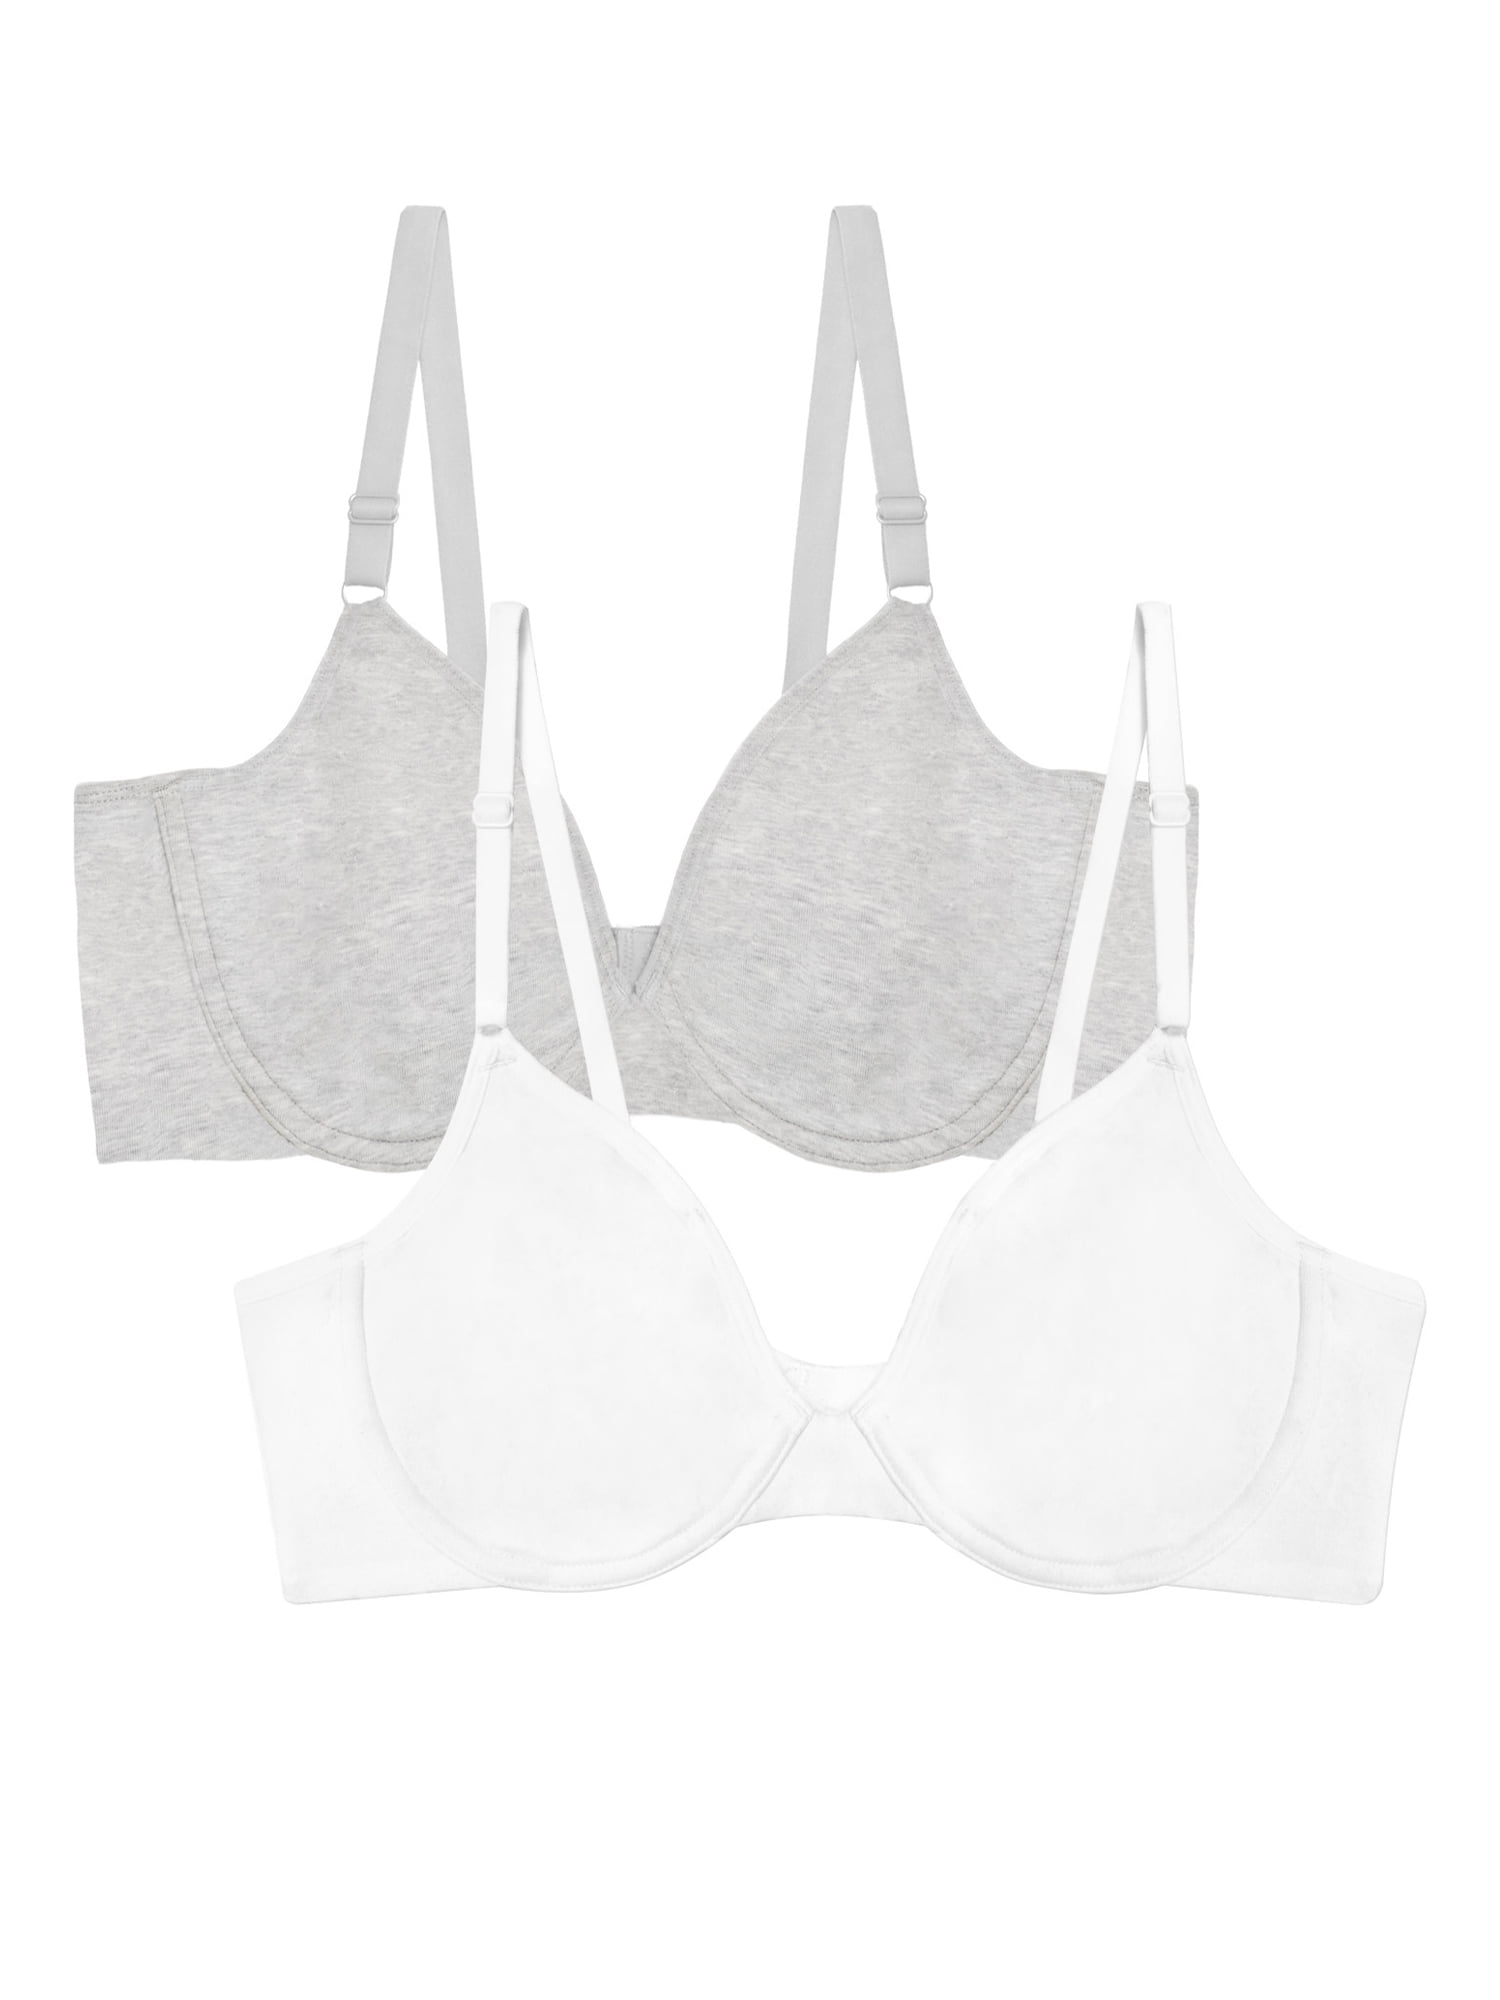 Fruit of the Loom Wireless Bra 2 Pack, Style FT942, Sizes S to XXXL